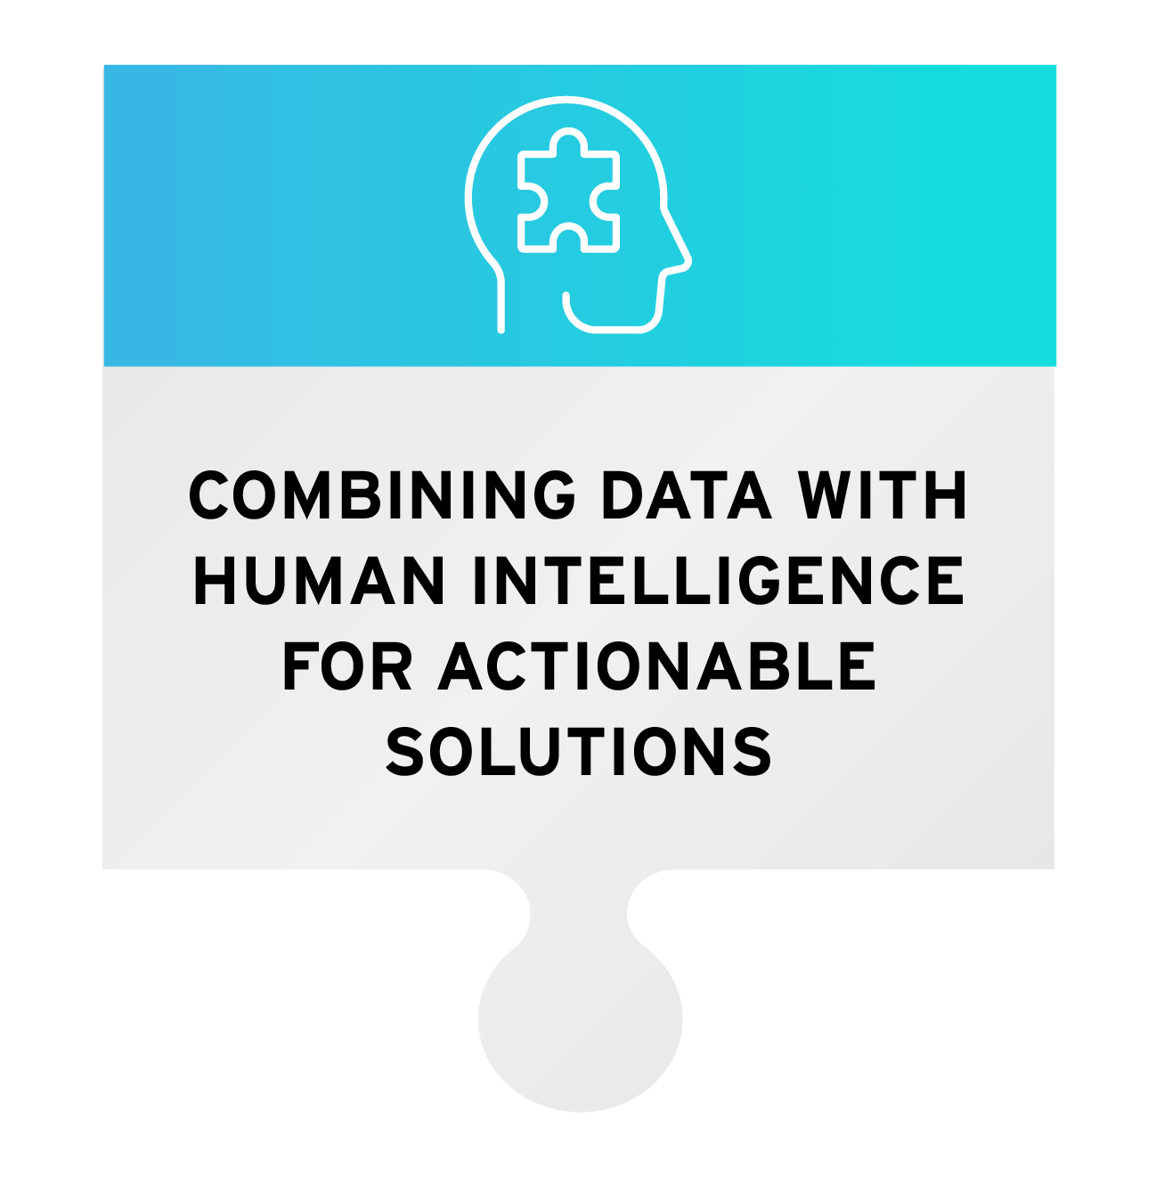 Combining data with human intelligence for actionable solutions